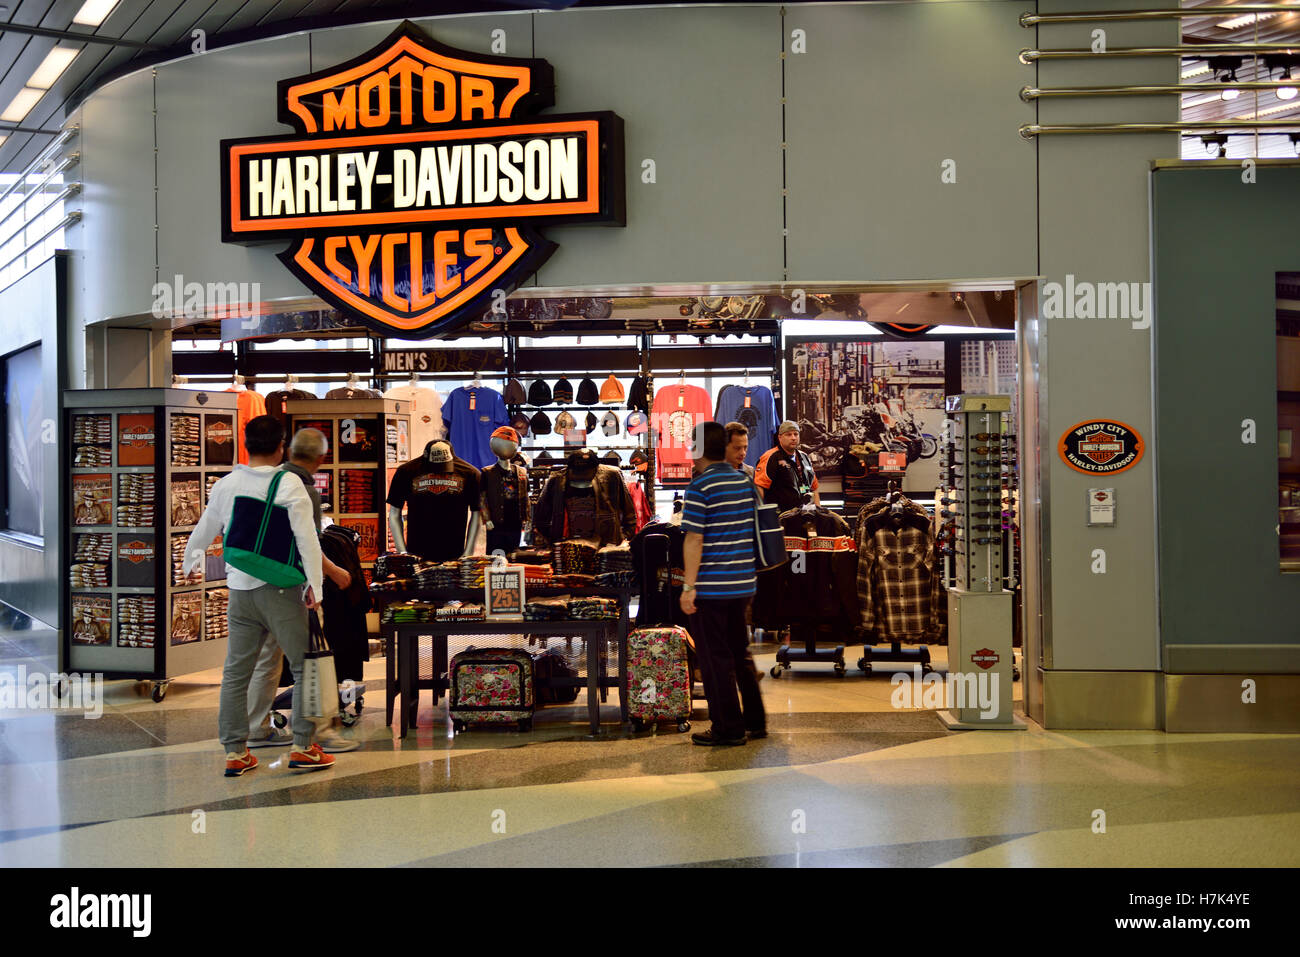 Harley Davidson Motor Cycles Shop In Chicago O Hare International Airport Usa Stock Photo Alamy